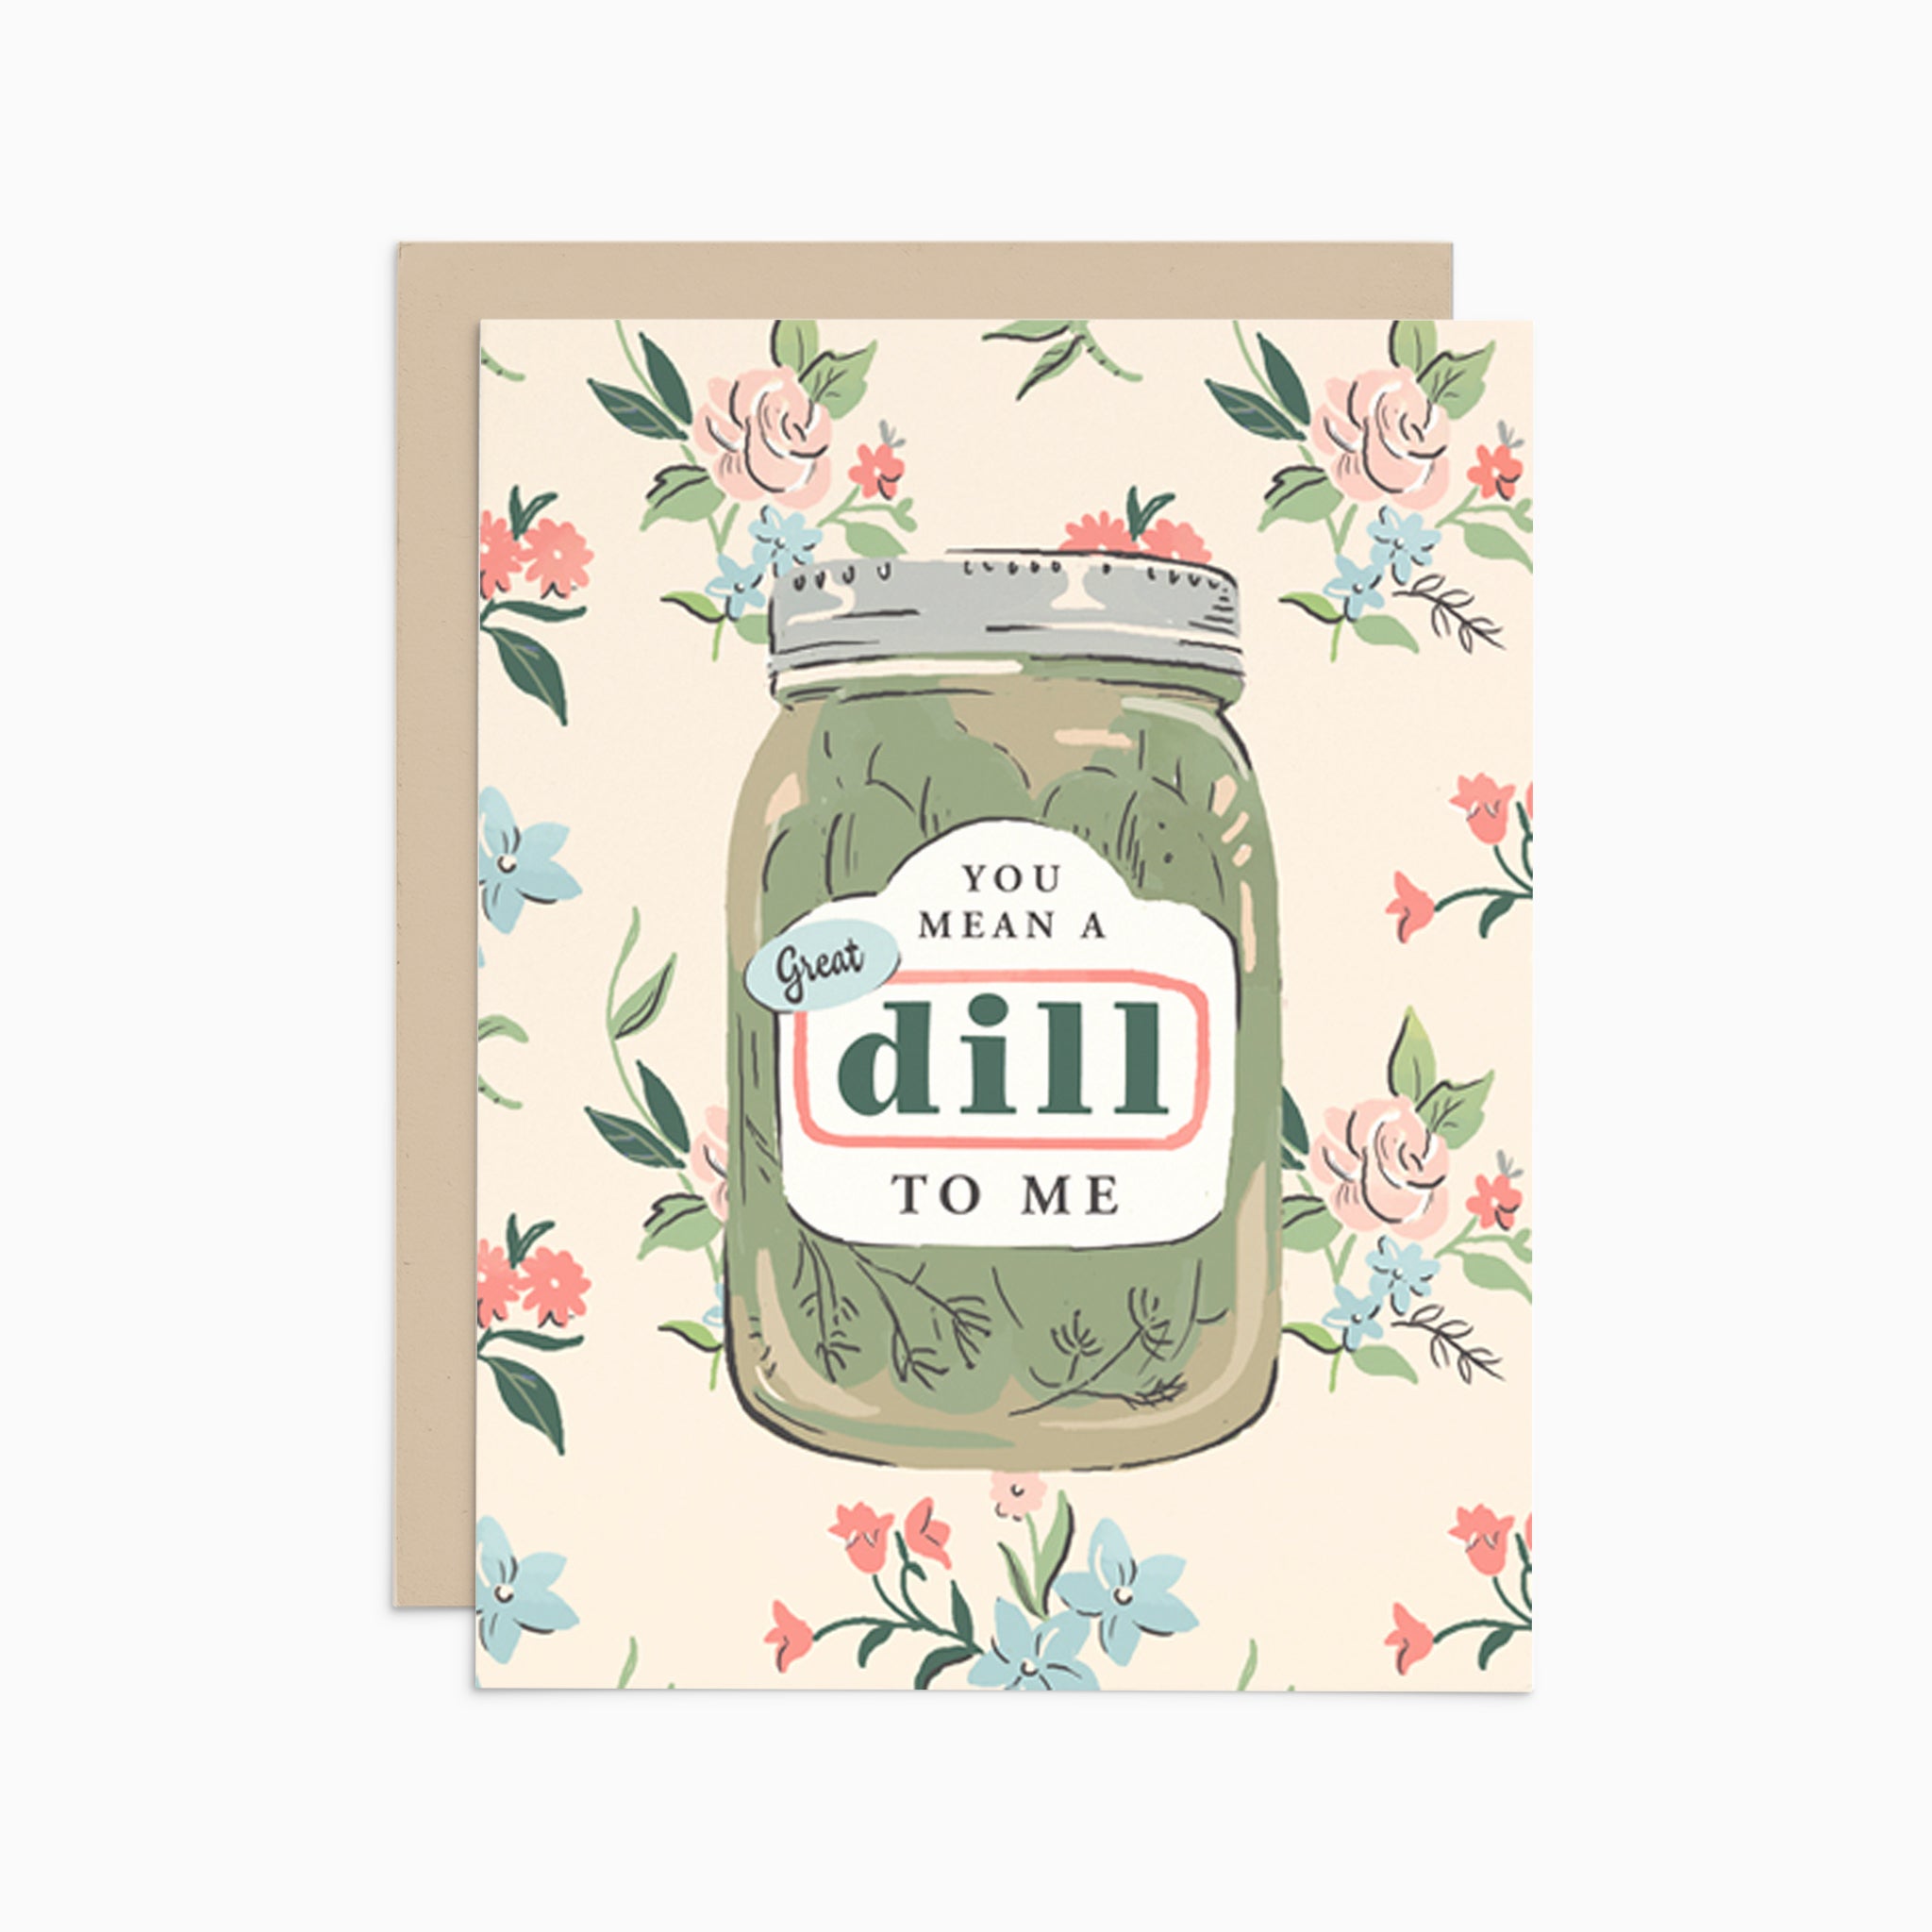 You Mean a Great Dill to Me Card